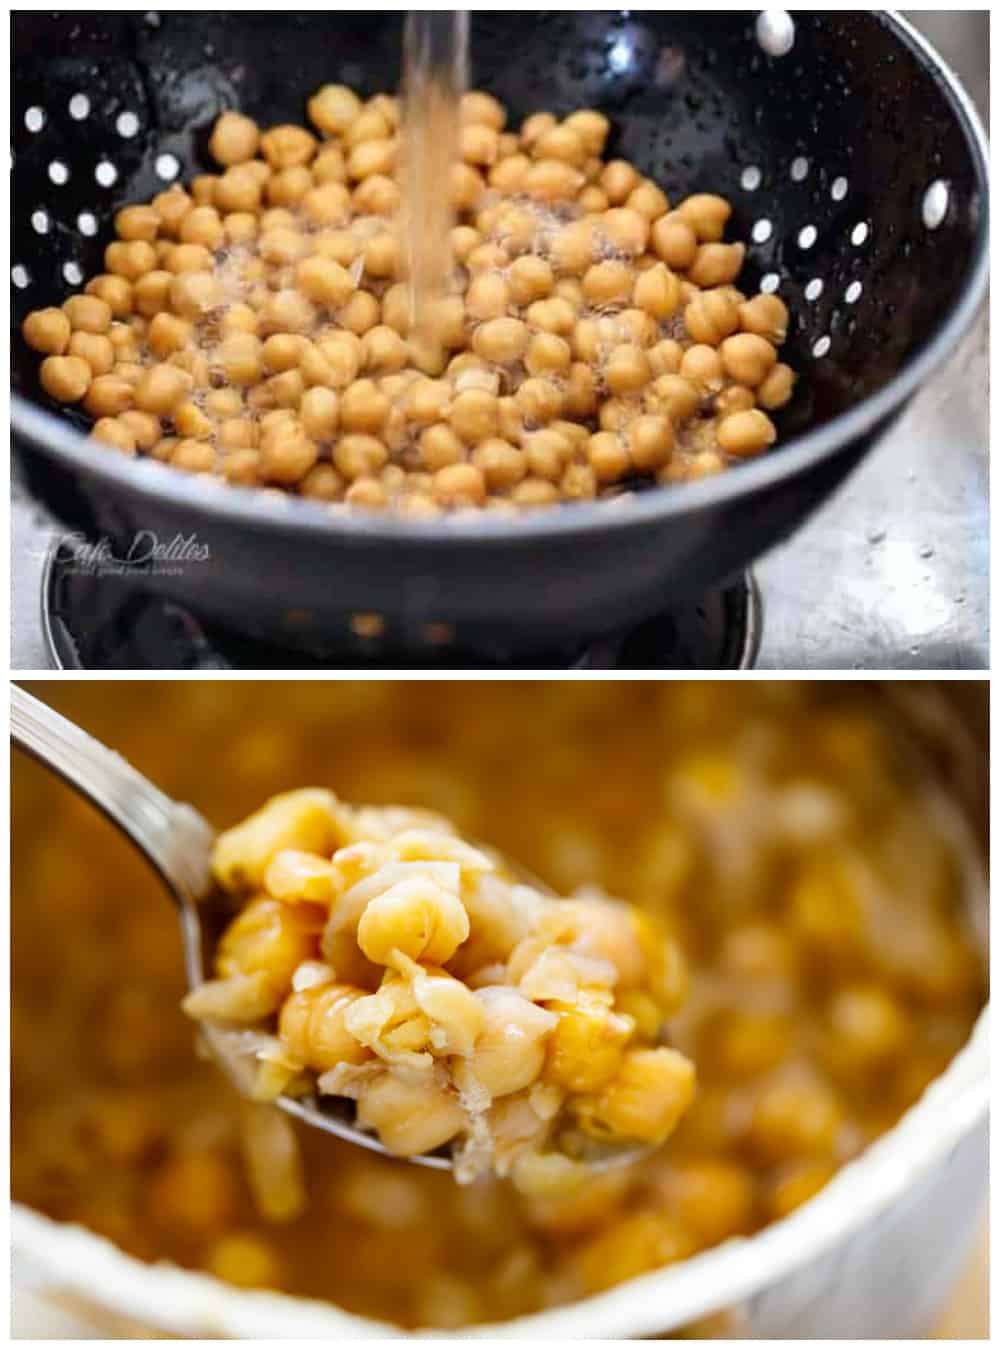 How to make hummus in a collage. Top image: washing chickpeas in a black strainer under cold running water. Bottom image: A spoon holding boiled chickpeas softened, just above a blurred pot full of boiled chickpeas.